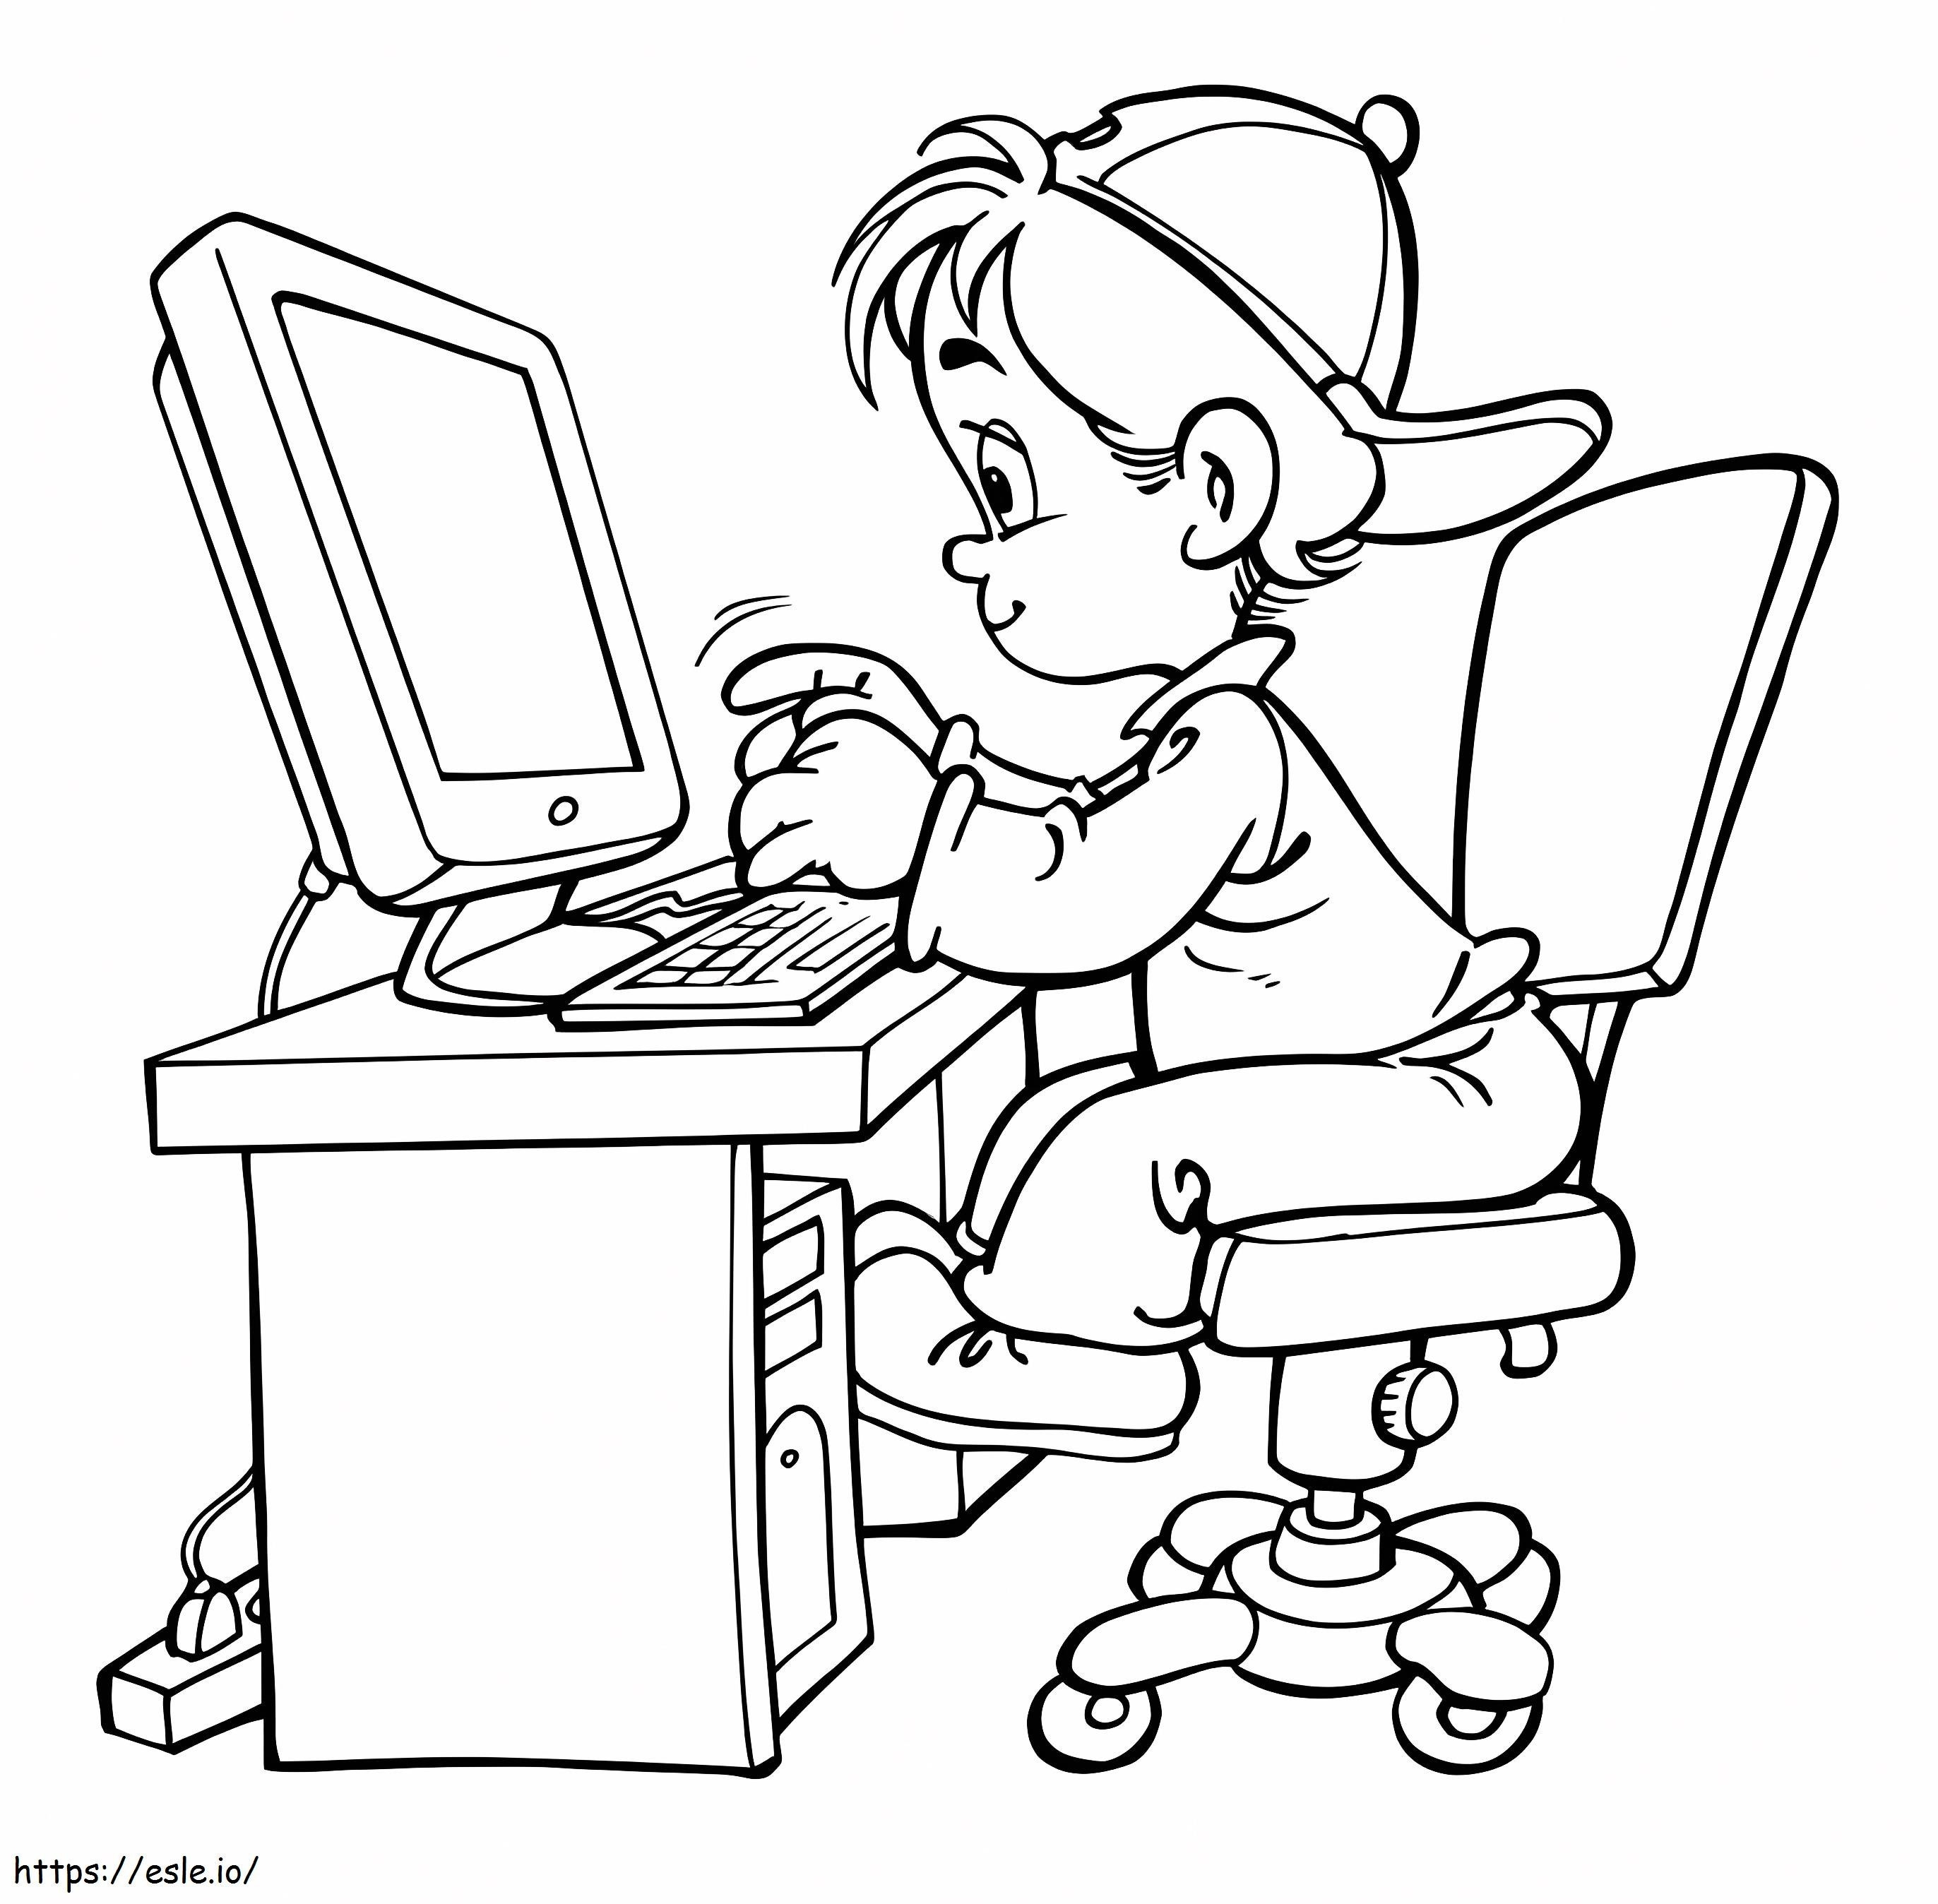 Boy On Computer coloring page